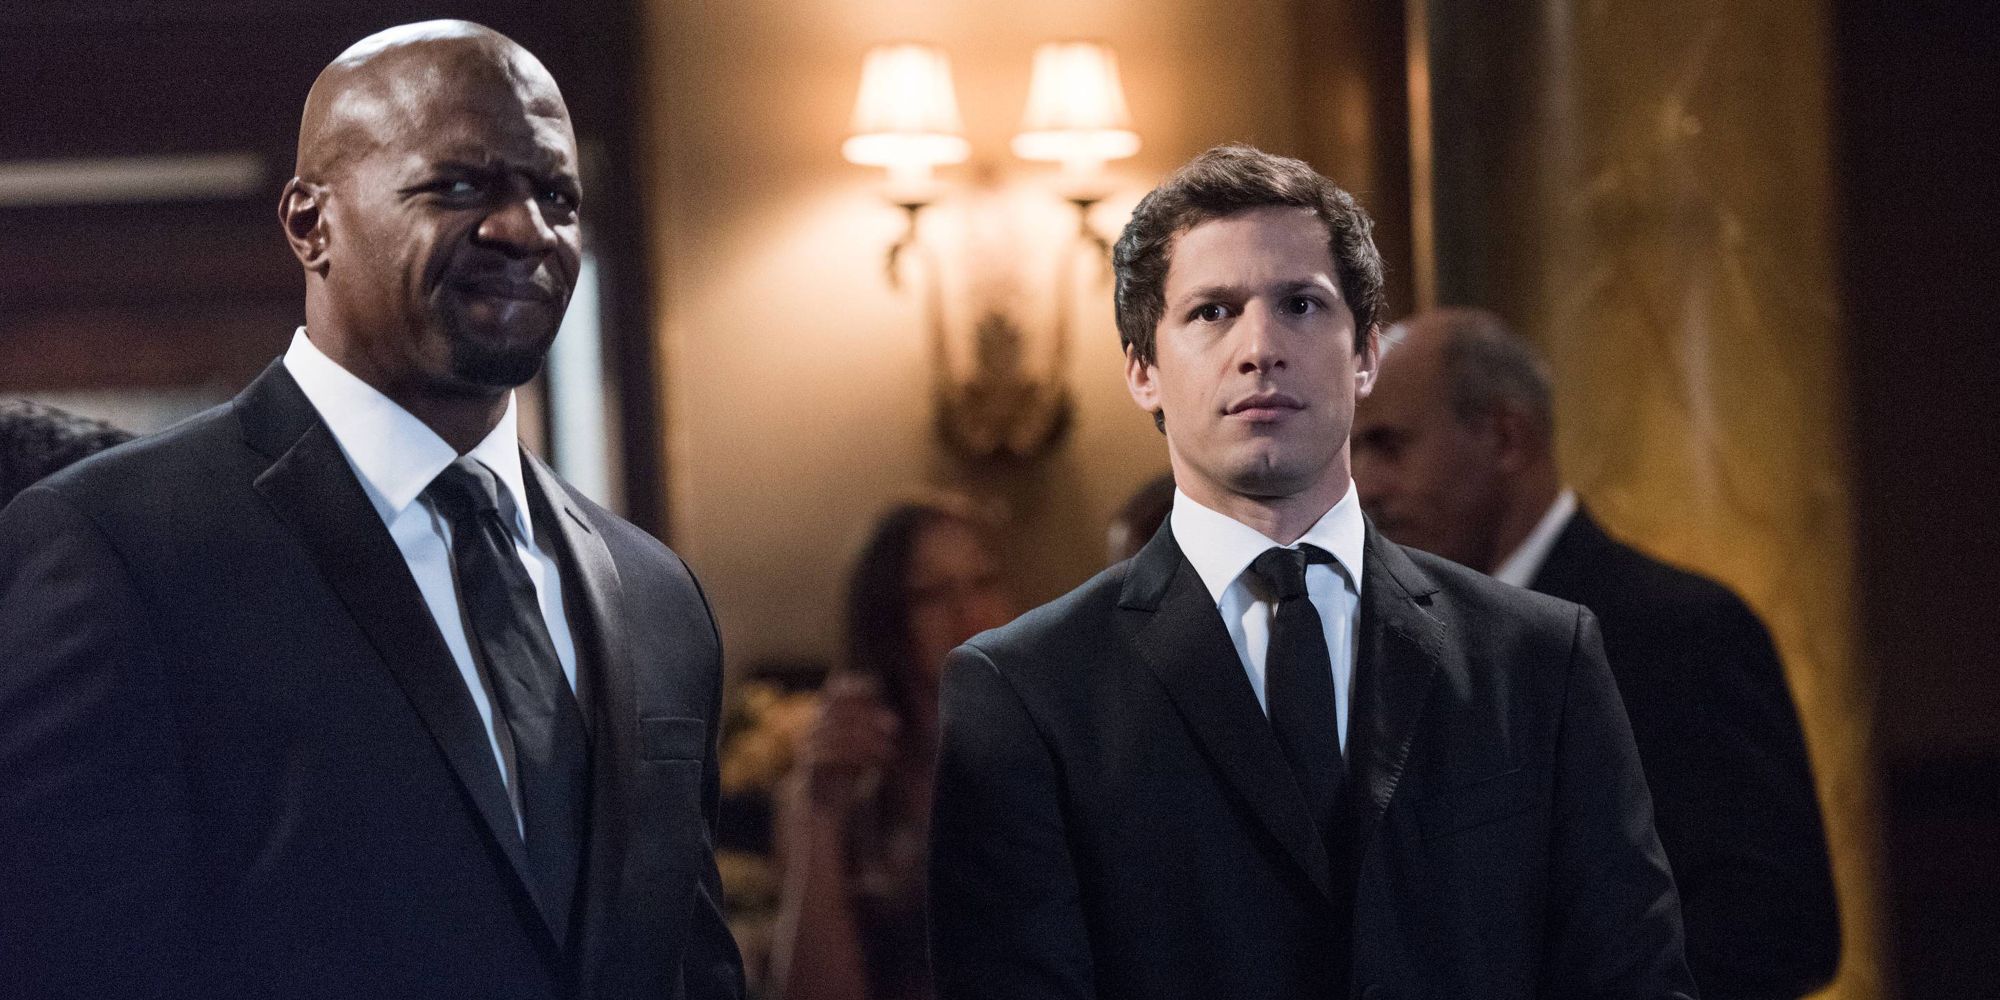 Jake and Terry wear suits and look uncomfortable in Brooklyn Nine-Nine